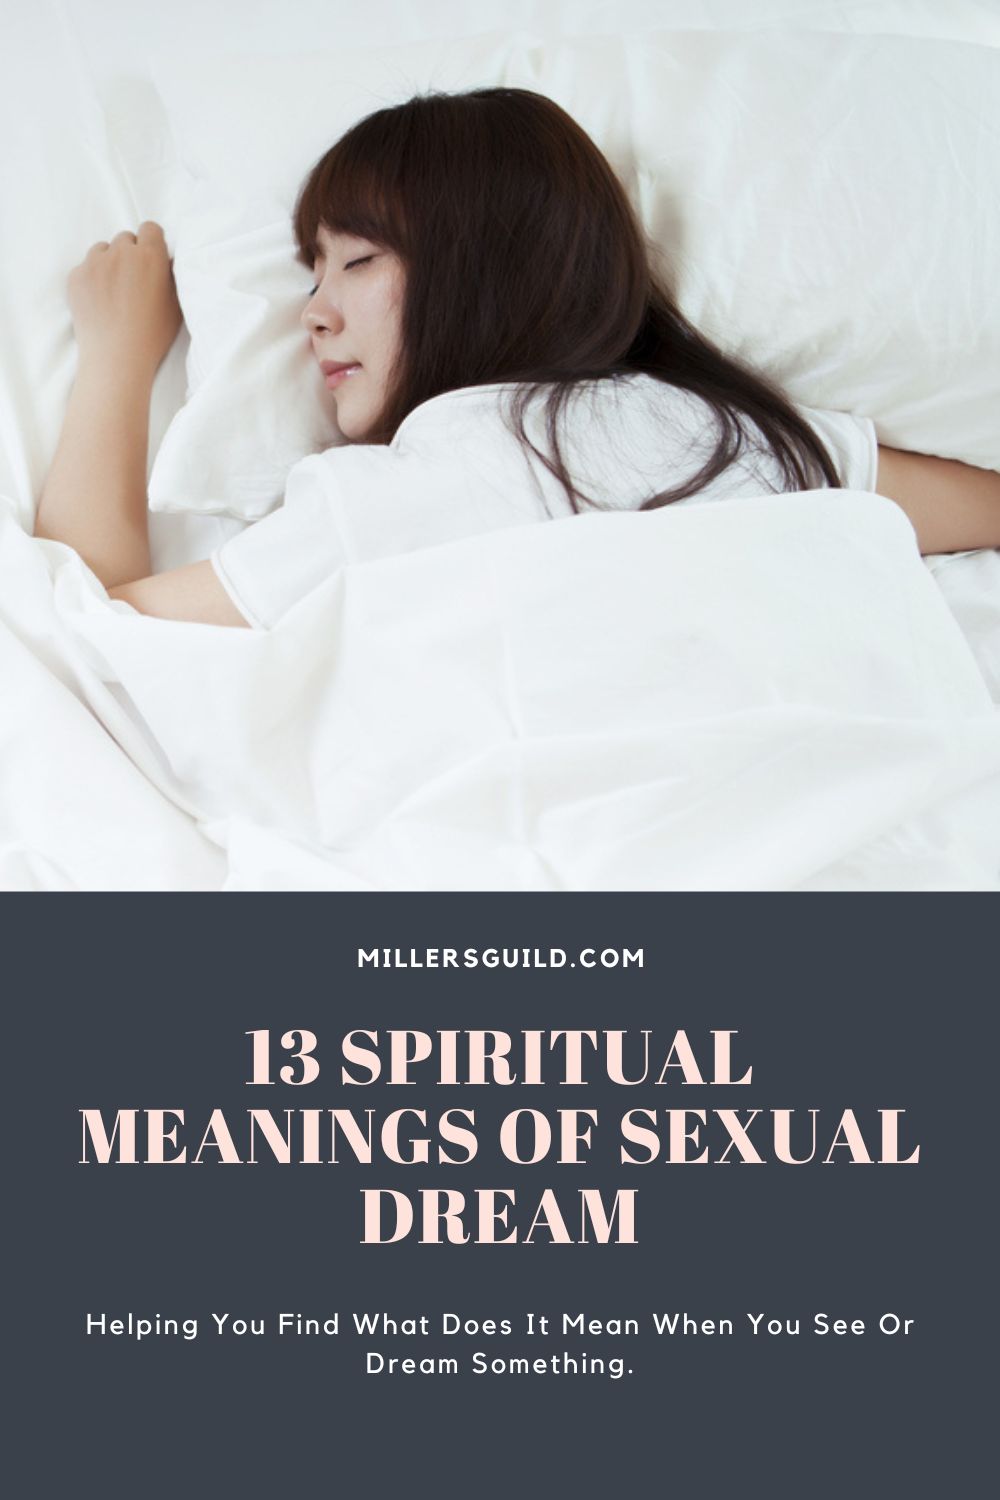 13 Spiritual Meanings of Sexual Dream